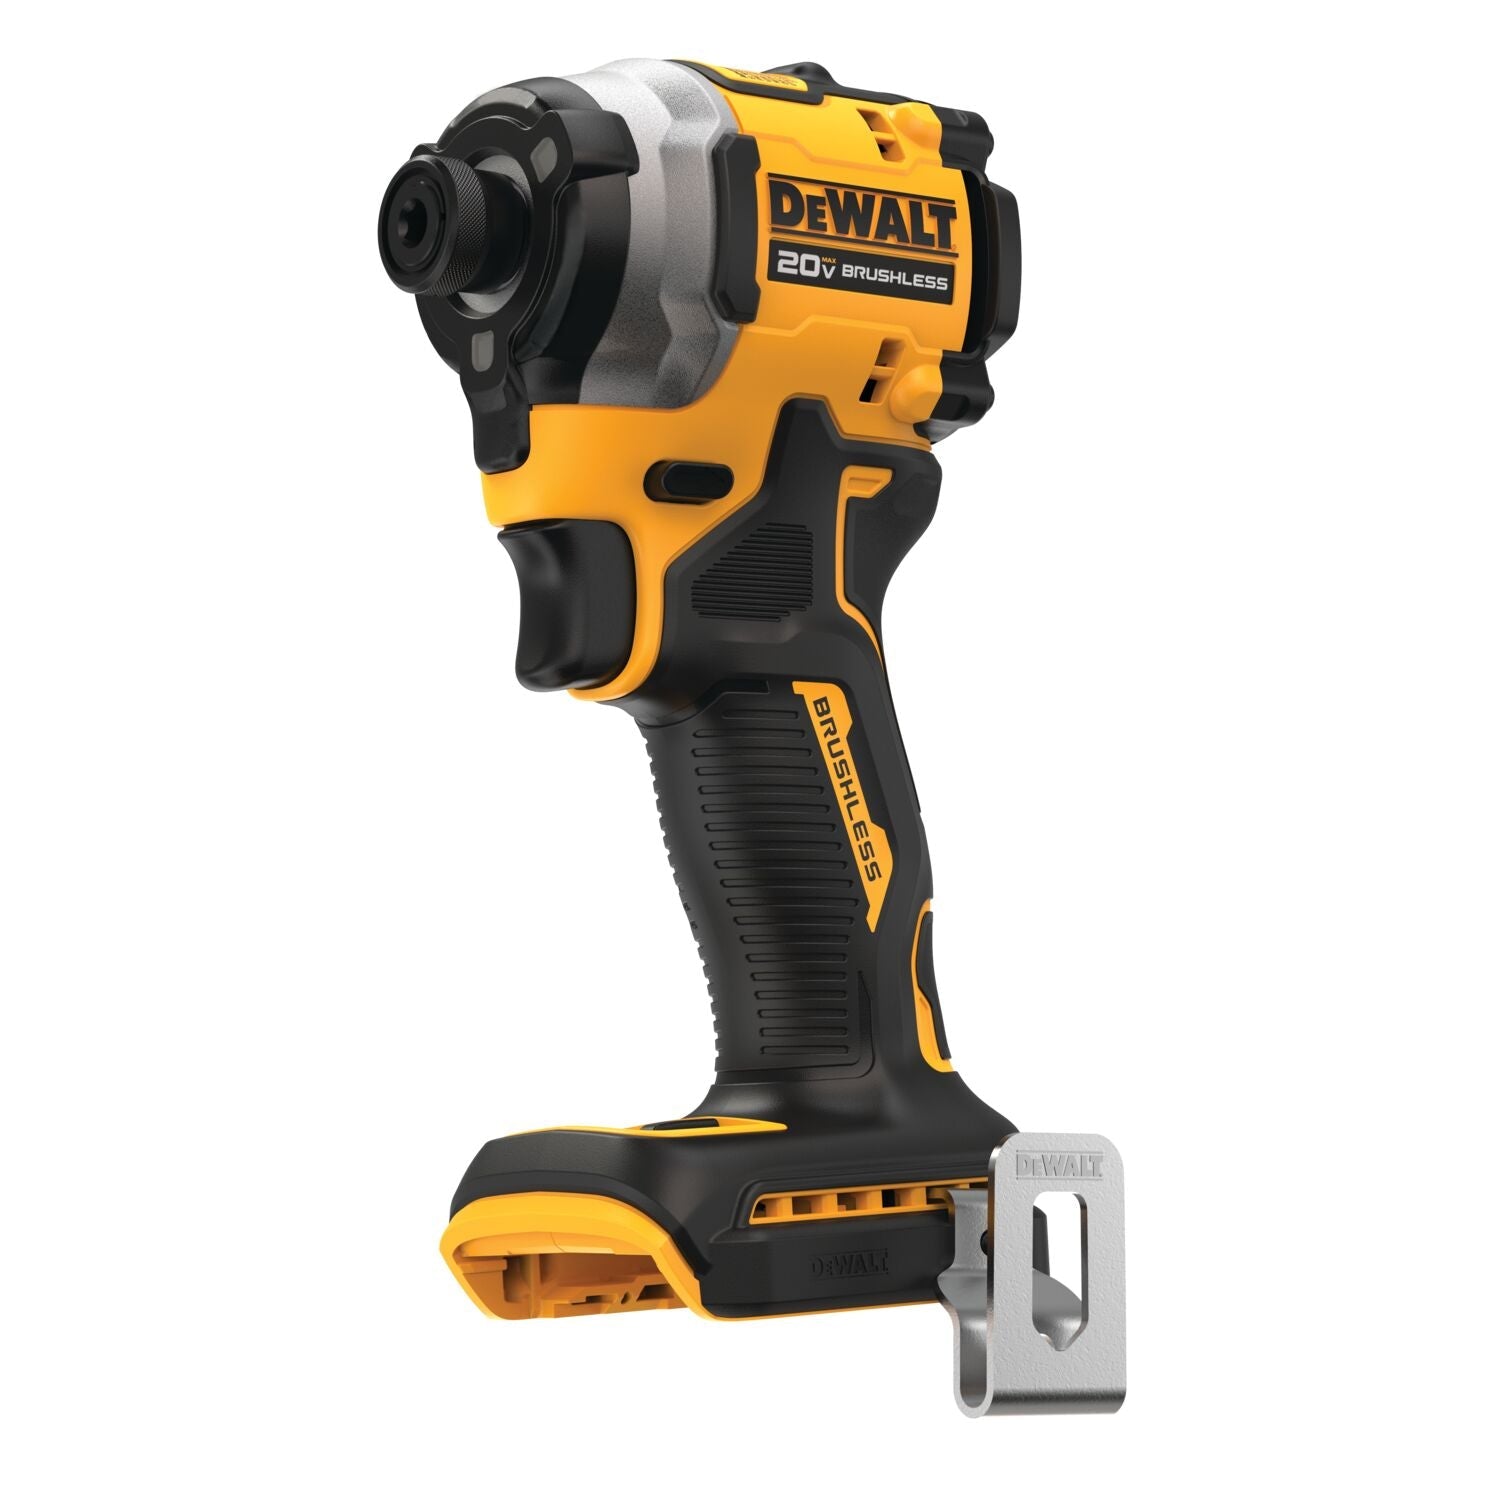 » DEWALT DCF850B ATOMIC 20V MAX* 1/4 IN. BRUSHLESS CORDLESS 3-SPEED IMPACT DRIVER (TOOL ONLY) (100% off)